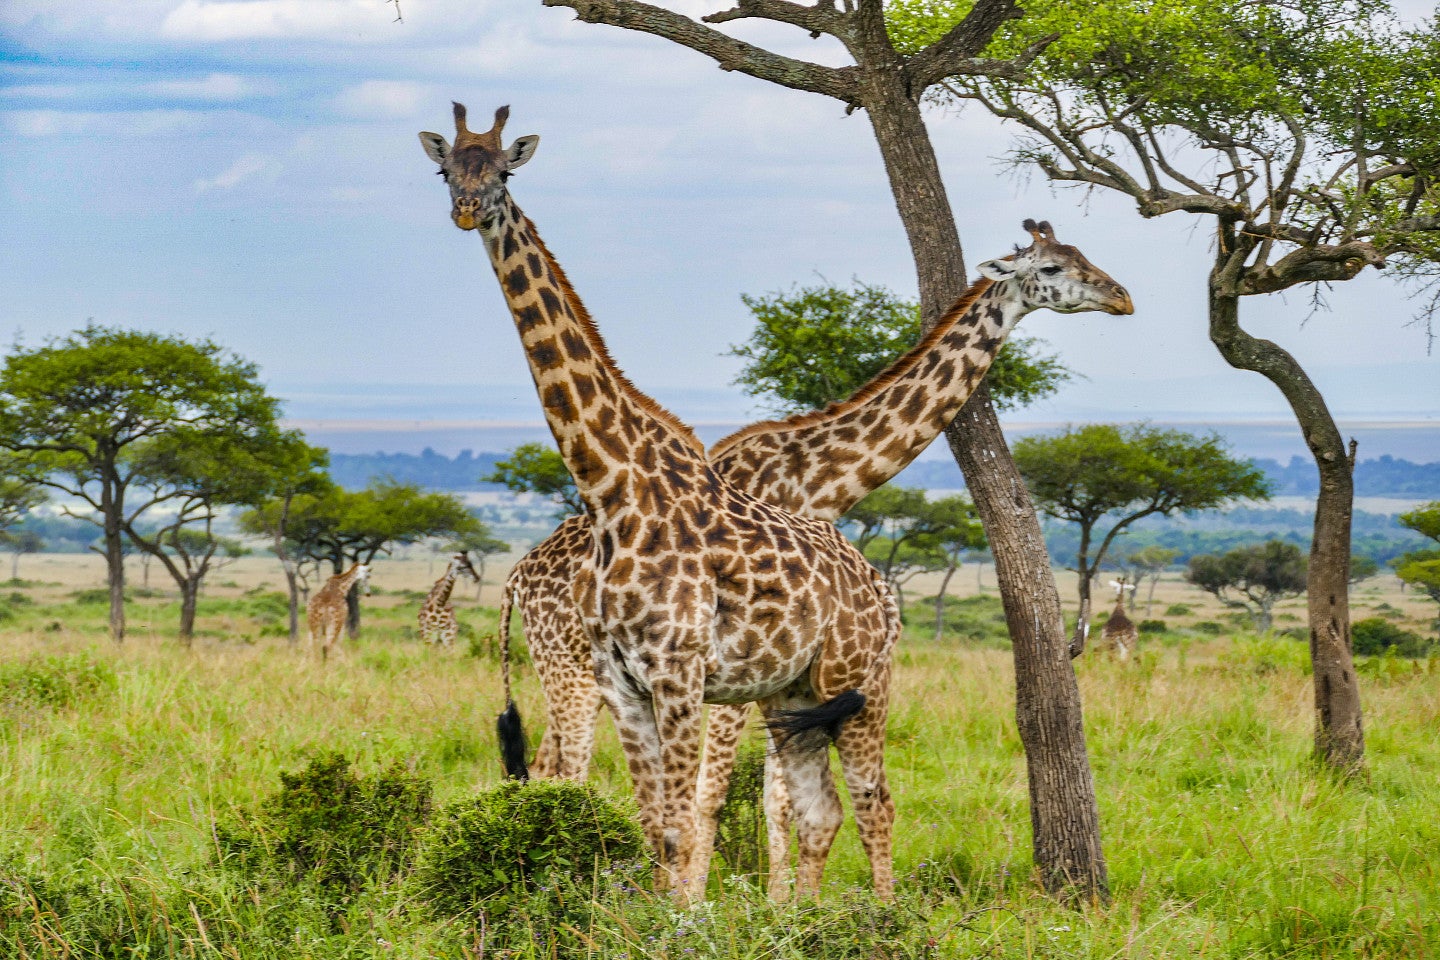 Photo of giraffes, two in the foreground and two in the background, on safari. The two giraffes in the foreground are leaning in opposite directions to eat and watch for predators.